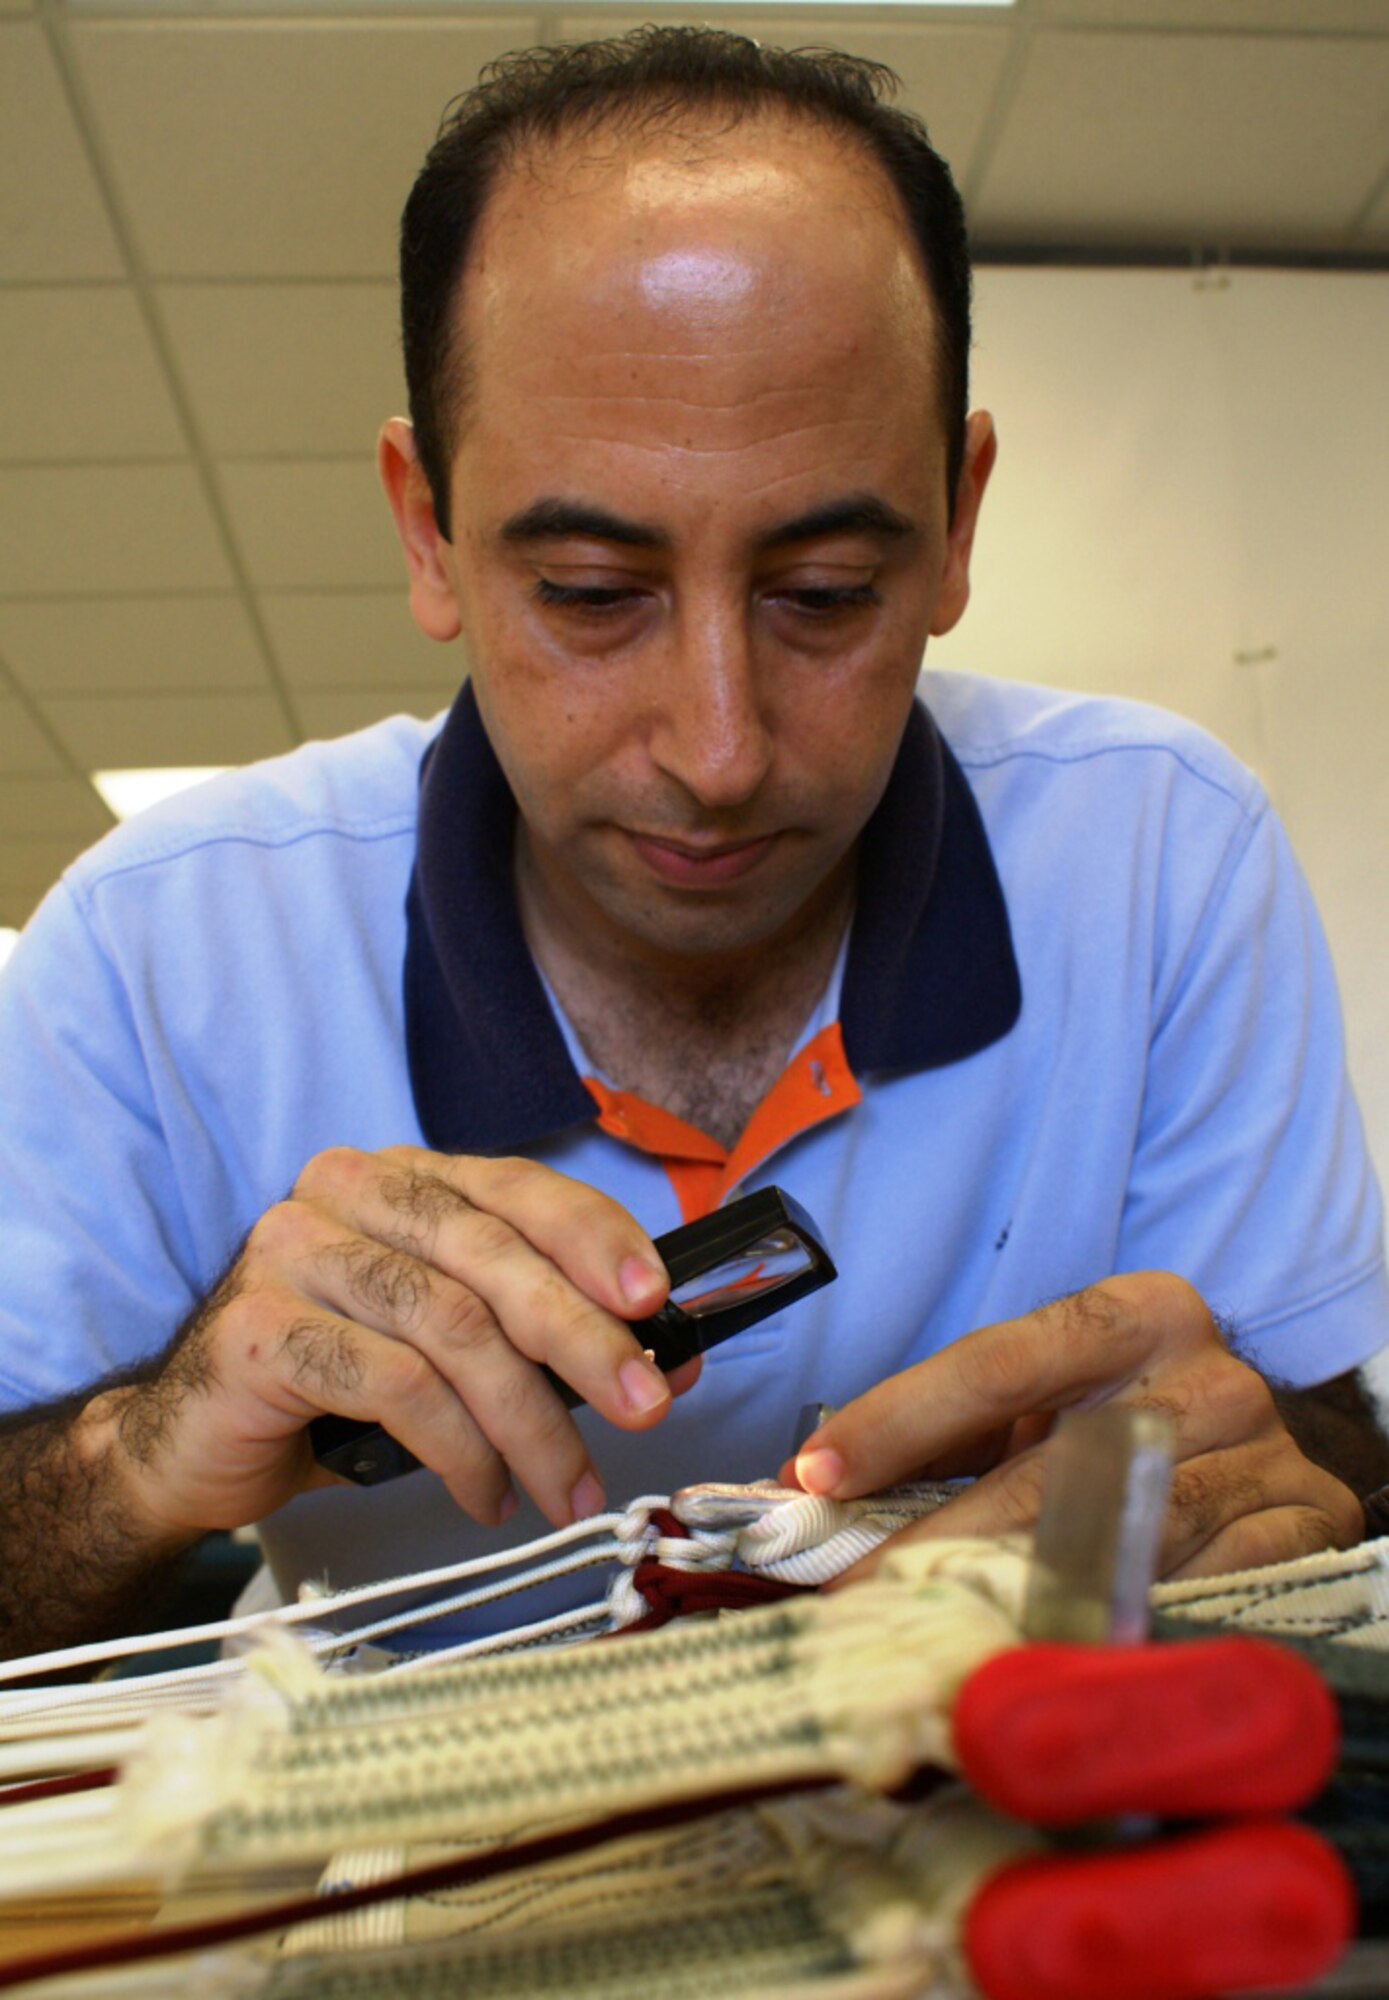 Khalid Bensitel, an Air Reserve Technician and Senior Airman in the Air Force Reserve, inspects the stitching on a parachute prior to packing the chute on Sep. 22. Bensitel is a survival equipment specialist here at Homestead Air Reserve Base, Fla. (Air Force photo by Dan Galindo)